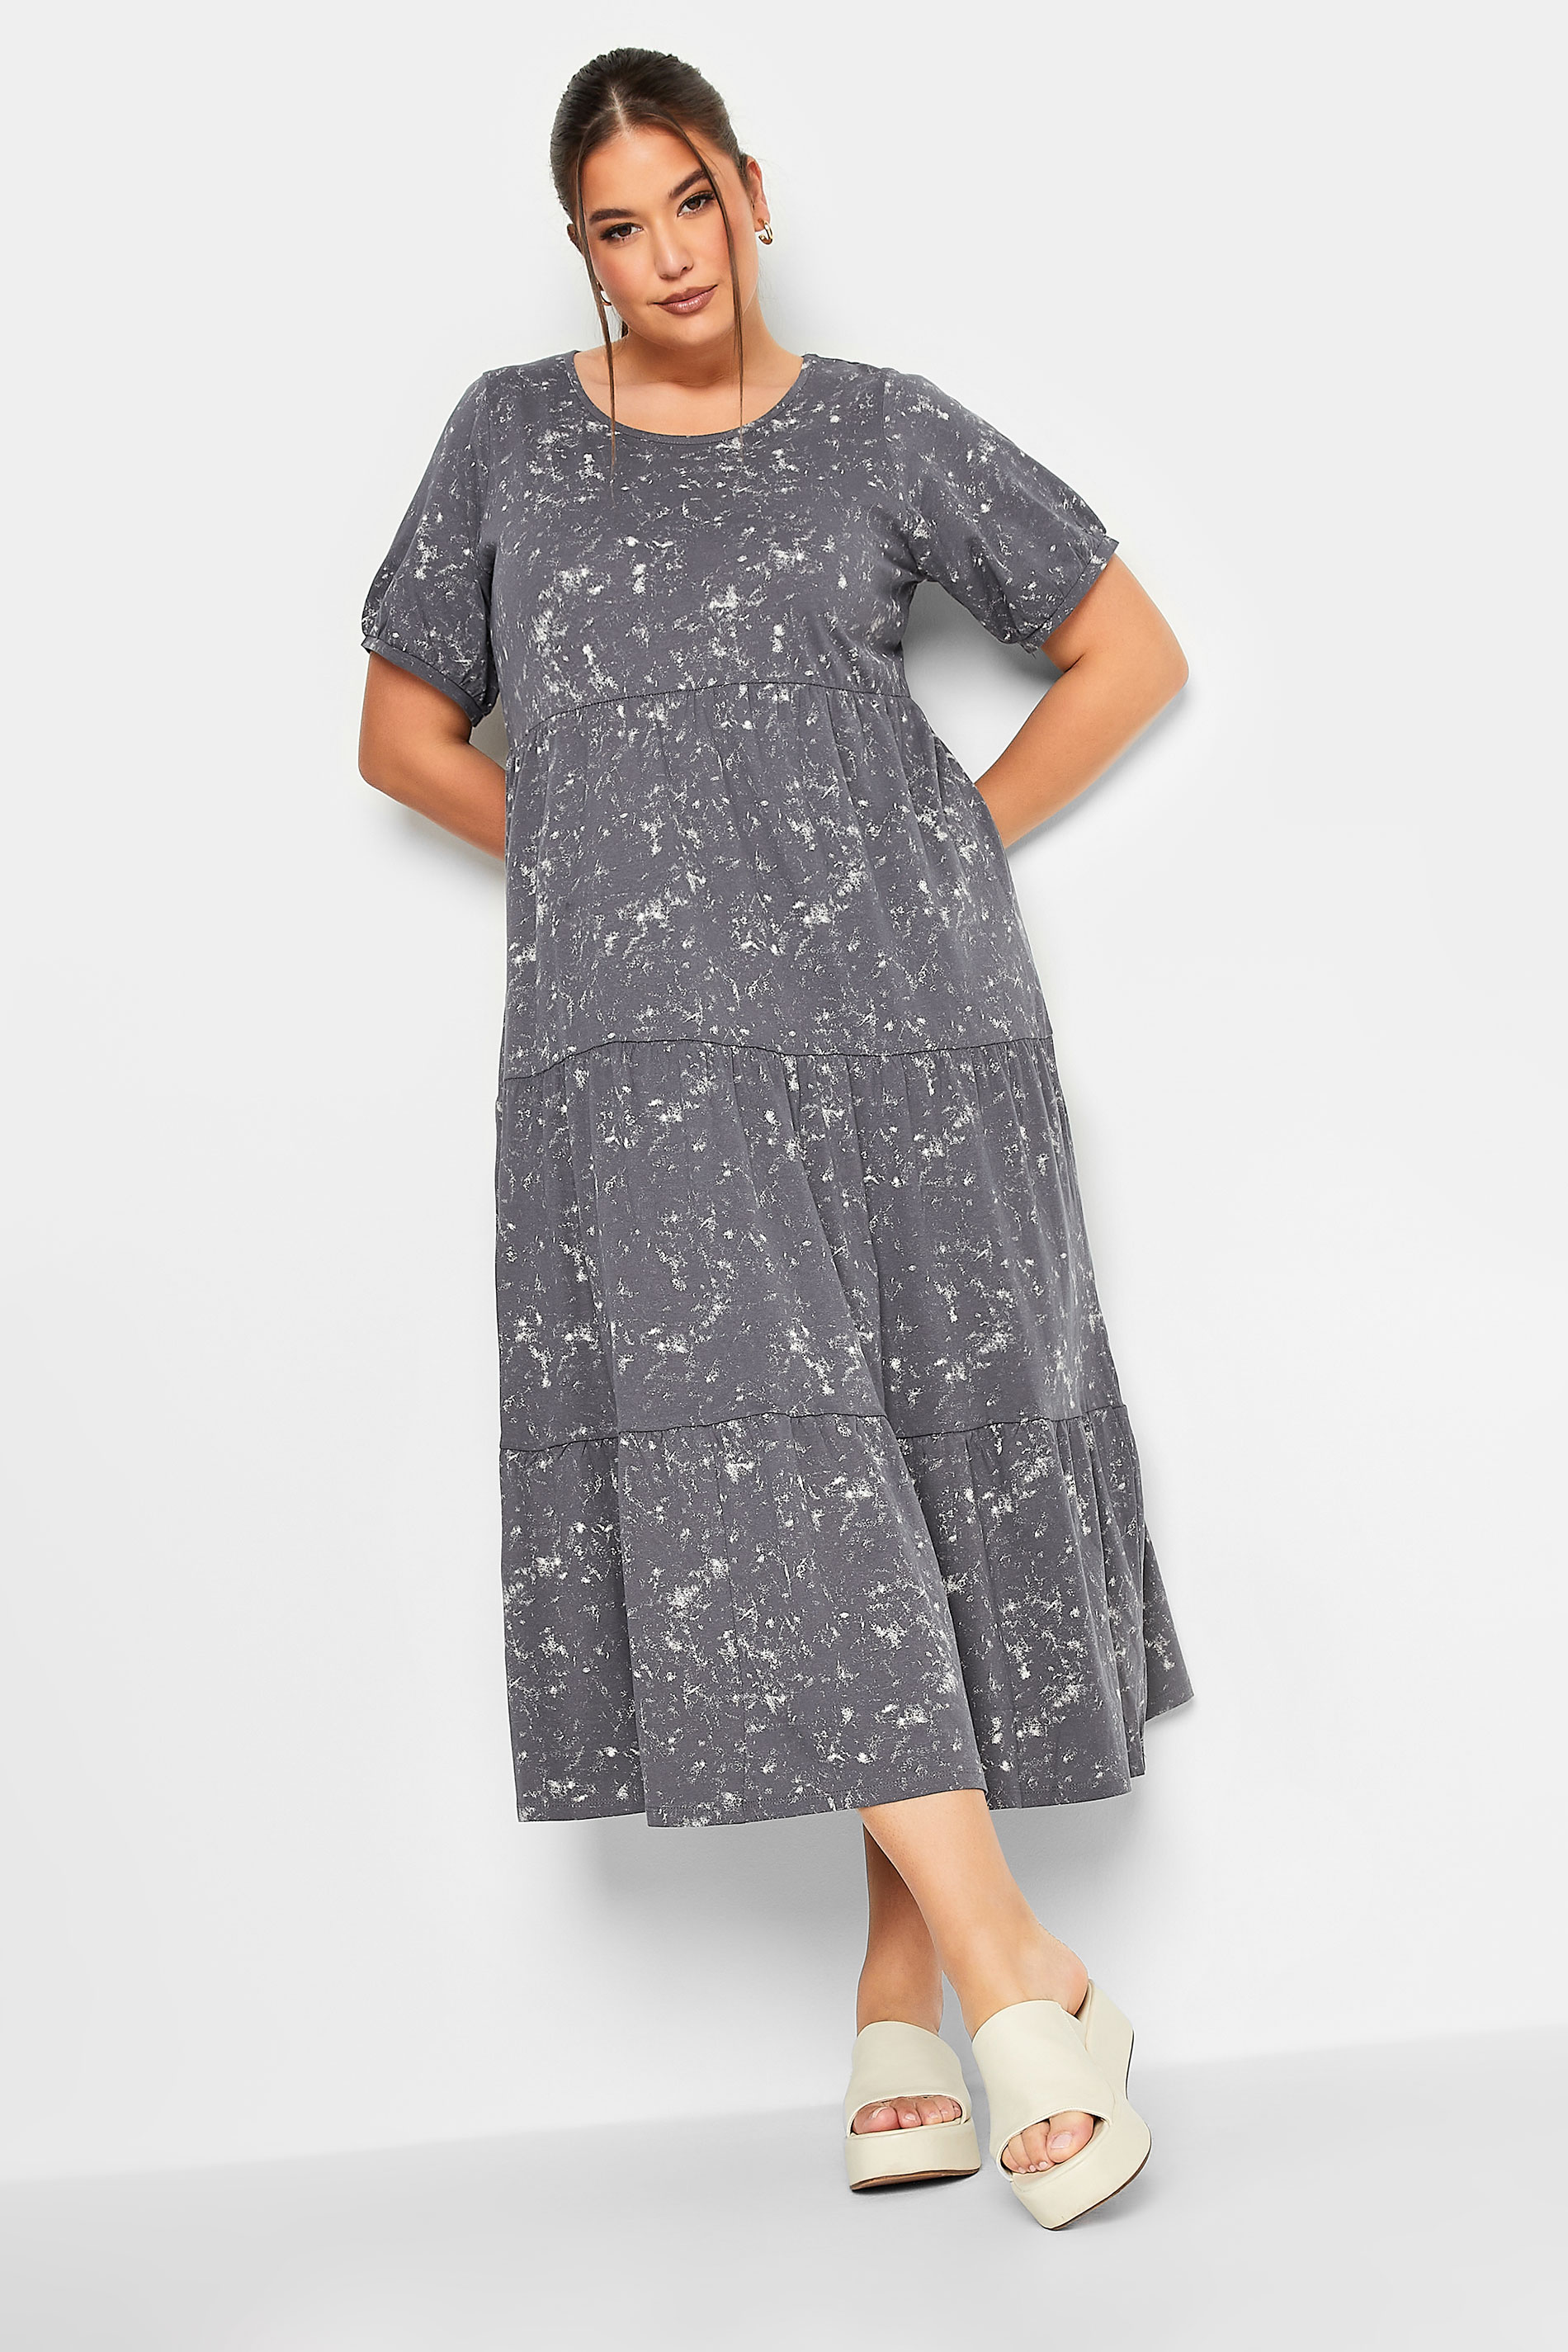 LIMITED COLLECTION Plus Size Grey Acid Wash Cotton Tier Dress | Yours Clothing 1